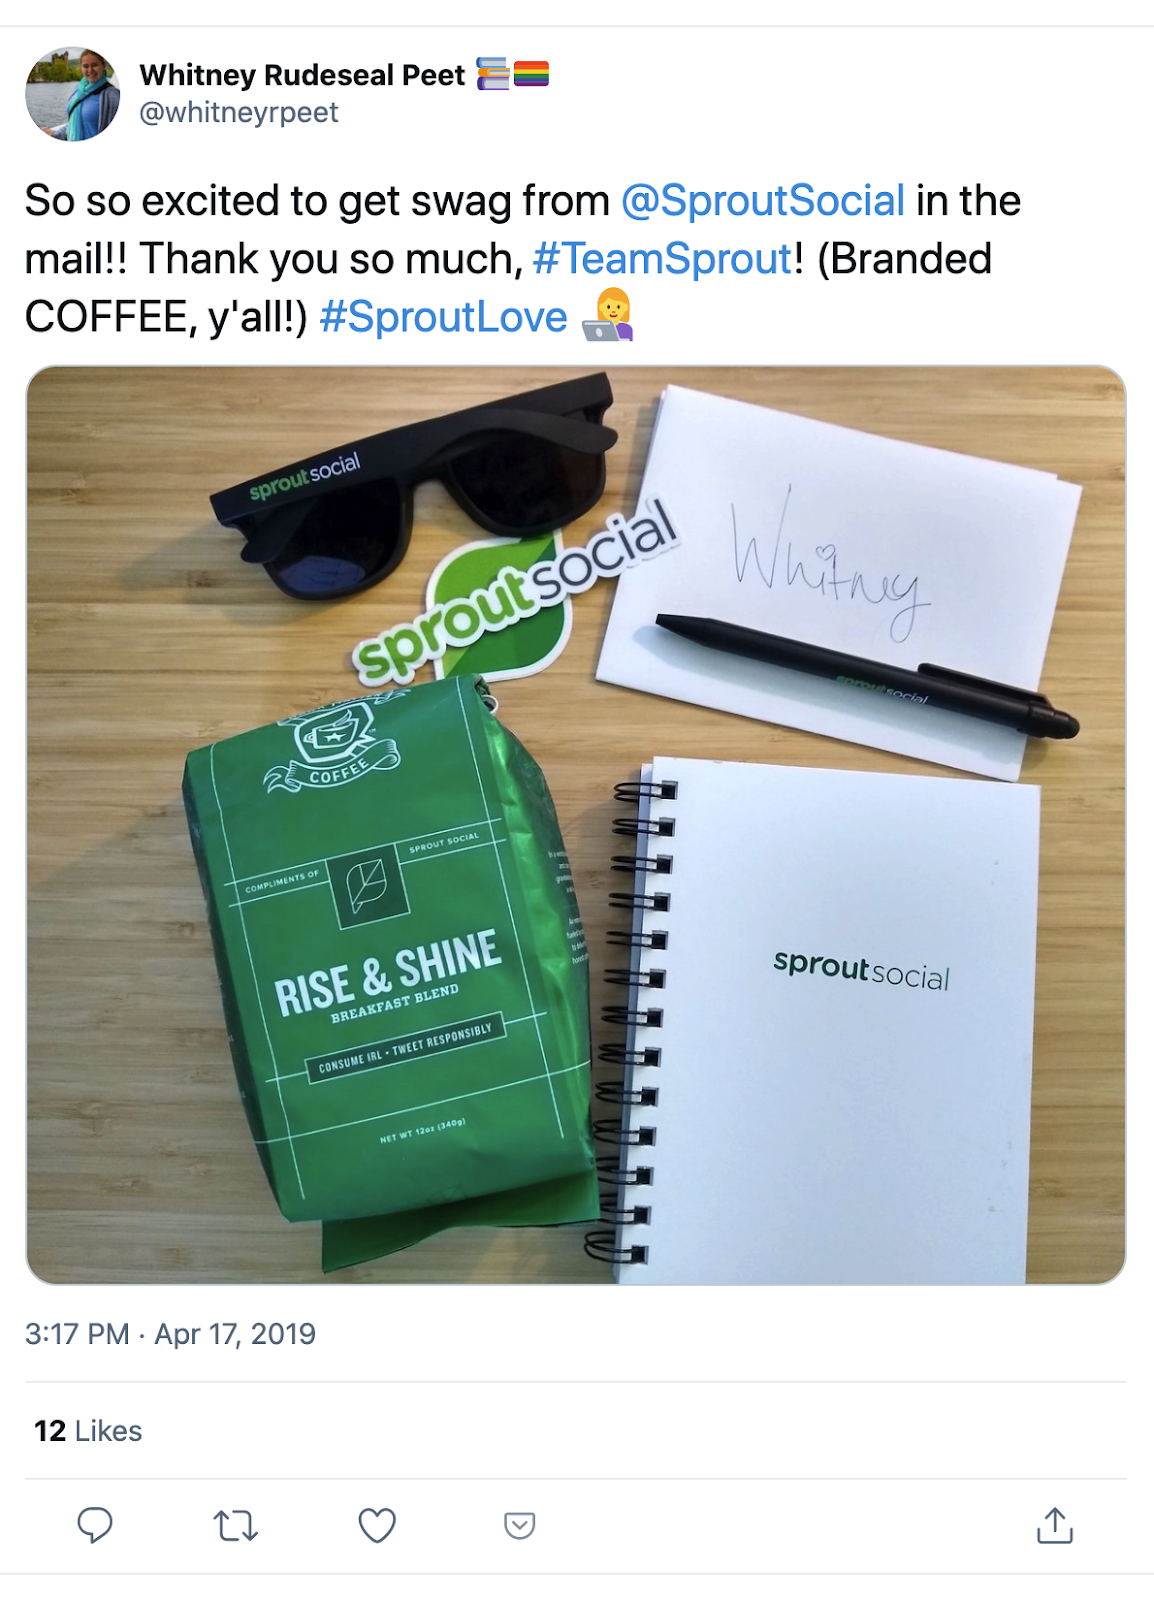 A screenshot of a tweet about receiving SproutSocial's swag